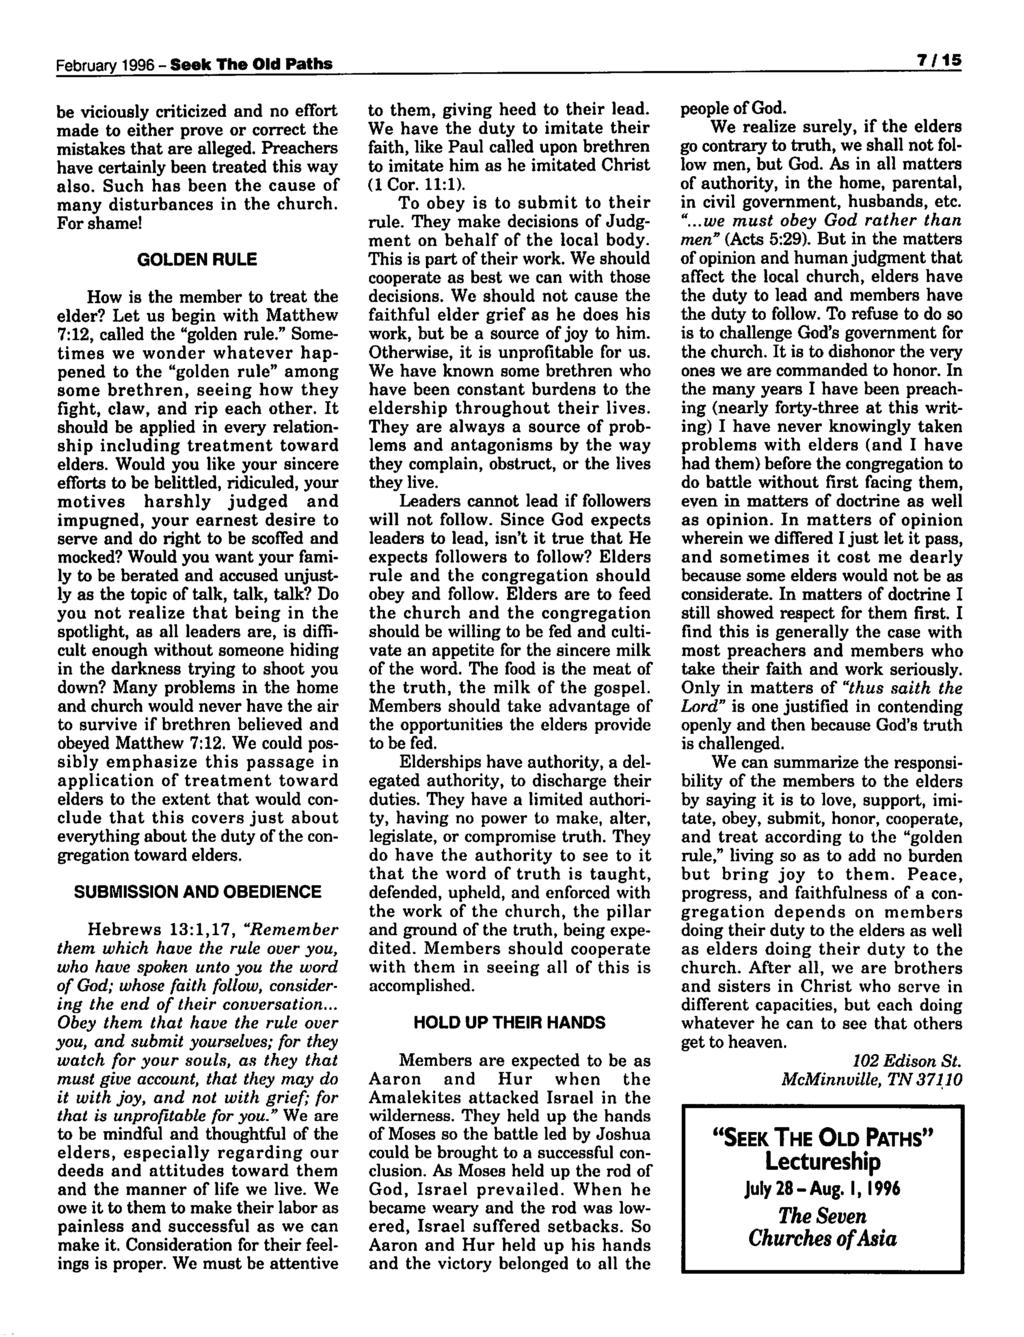 February1996 - Seek The Old Paths be viciusly criticized and n effrt made t either prve r crrect the mistakes that are alleged. Preachers have certainly been treated this way als.